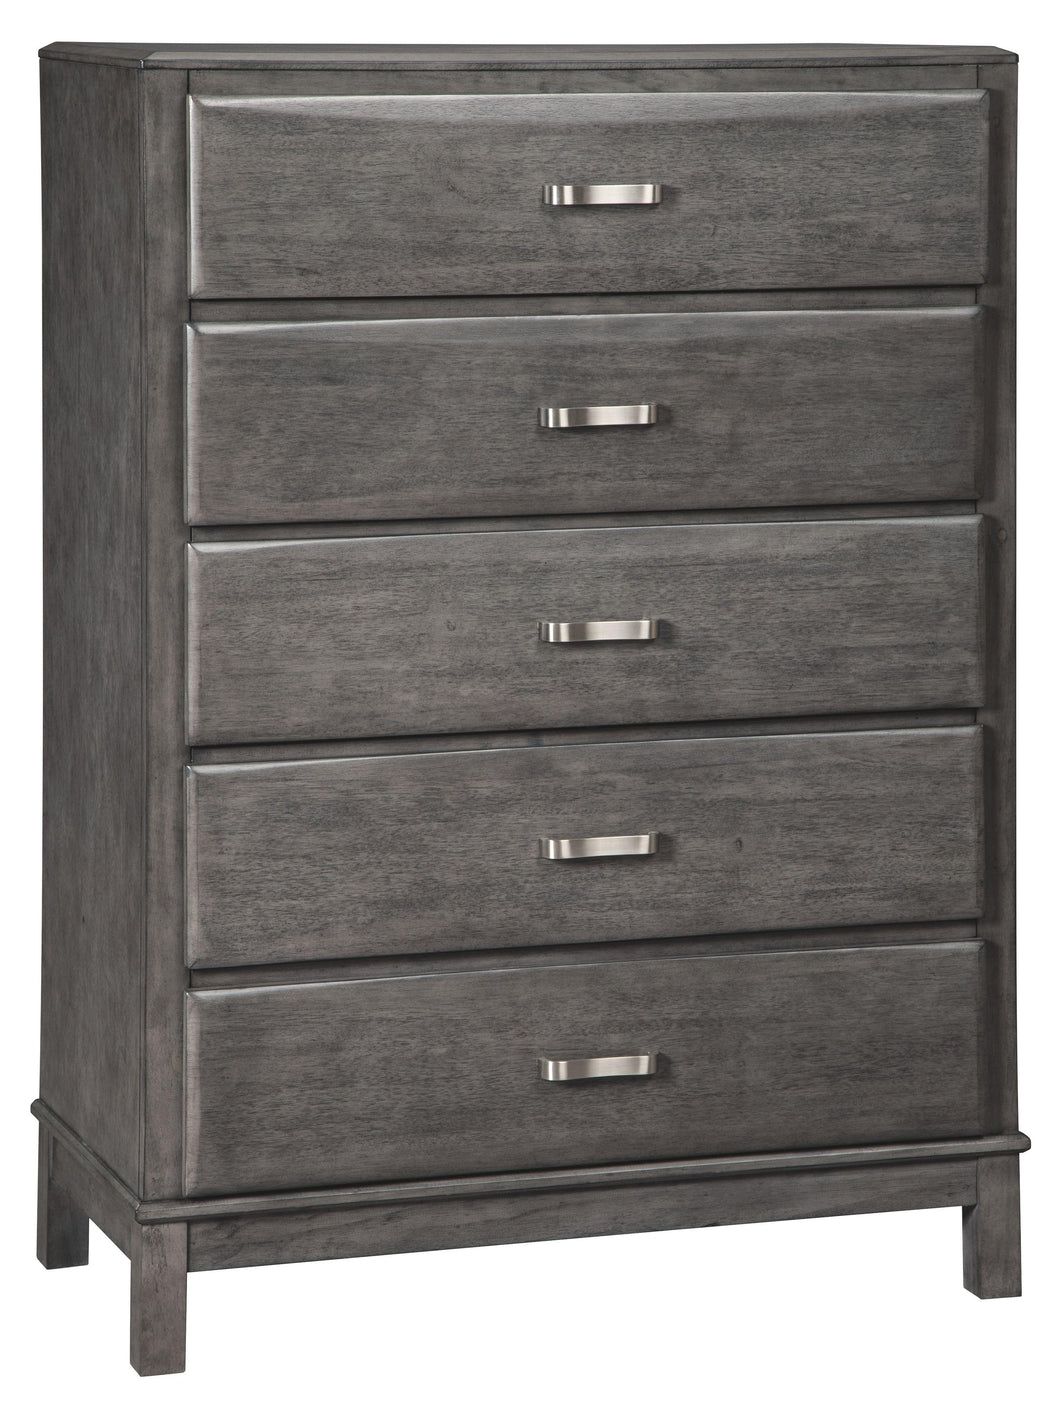 Caitbrook - Five Drawer Chest image